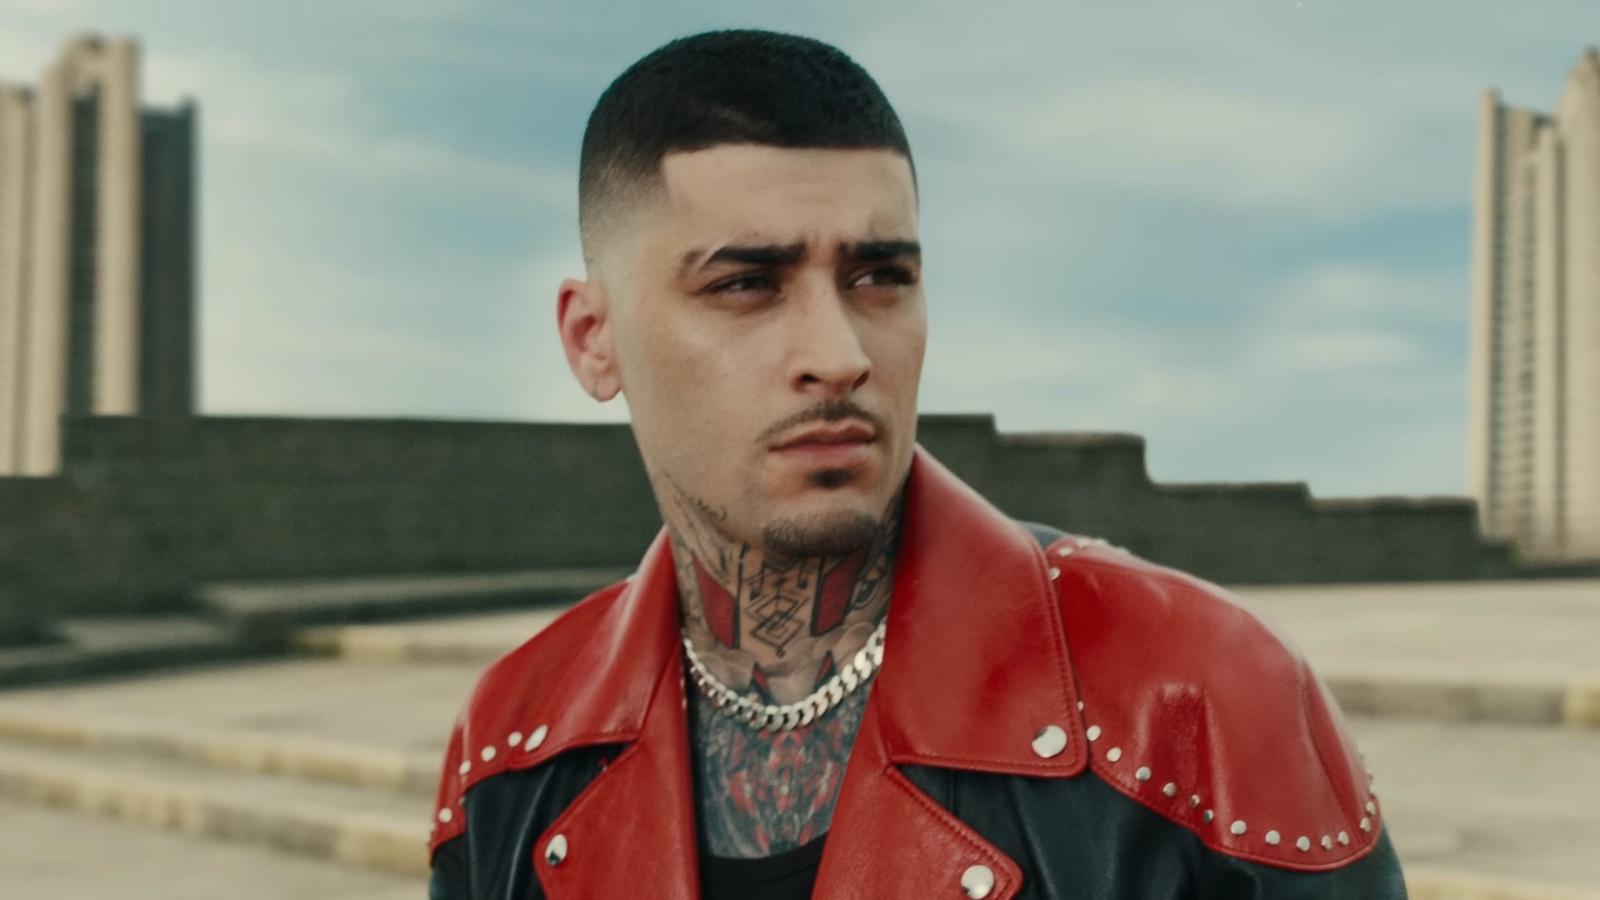 Zayn wearing a red and black jacket on a rooftop